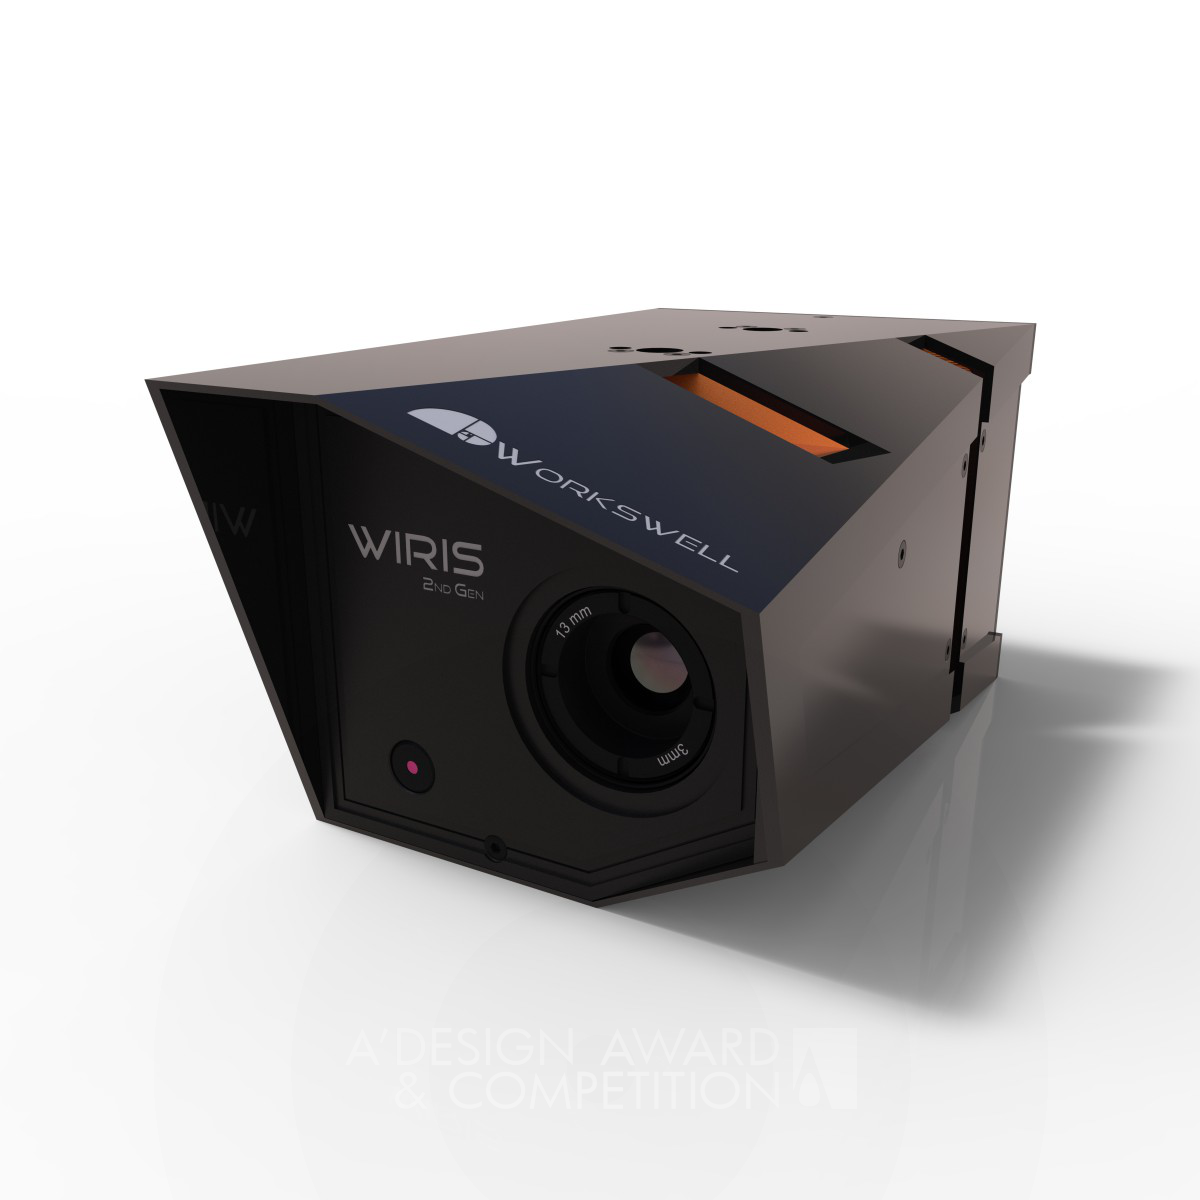 Workswell Wiris <b>Thermal imaging system